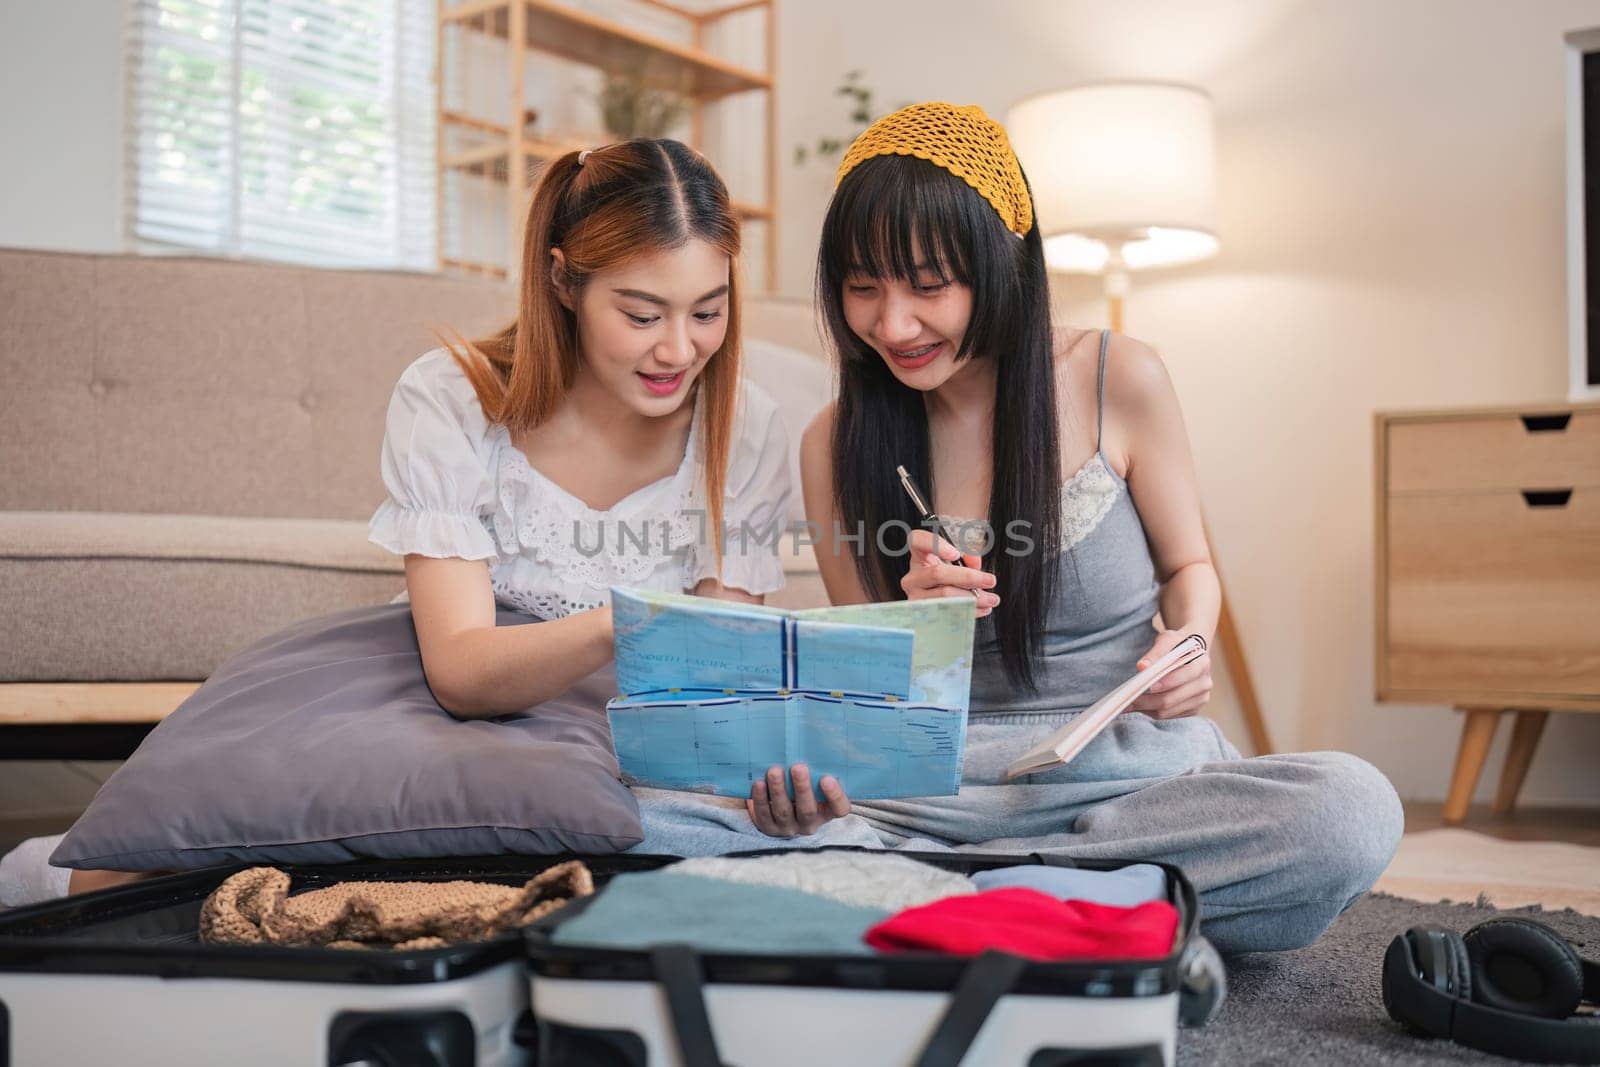 Two women are looking at a map and writing in a notebook. They are sitting on a bed with suitcases and a lamp nearby